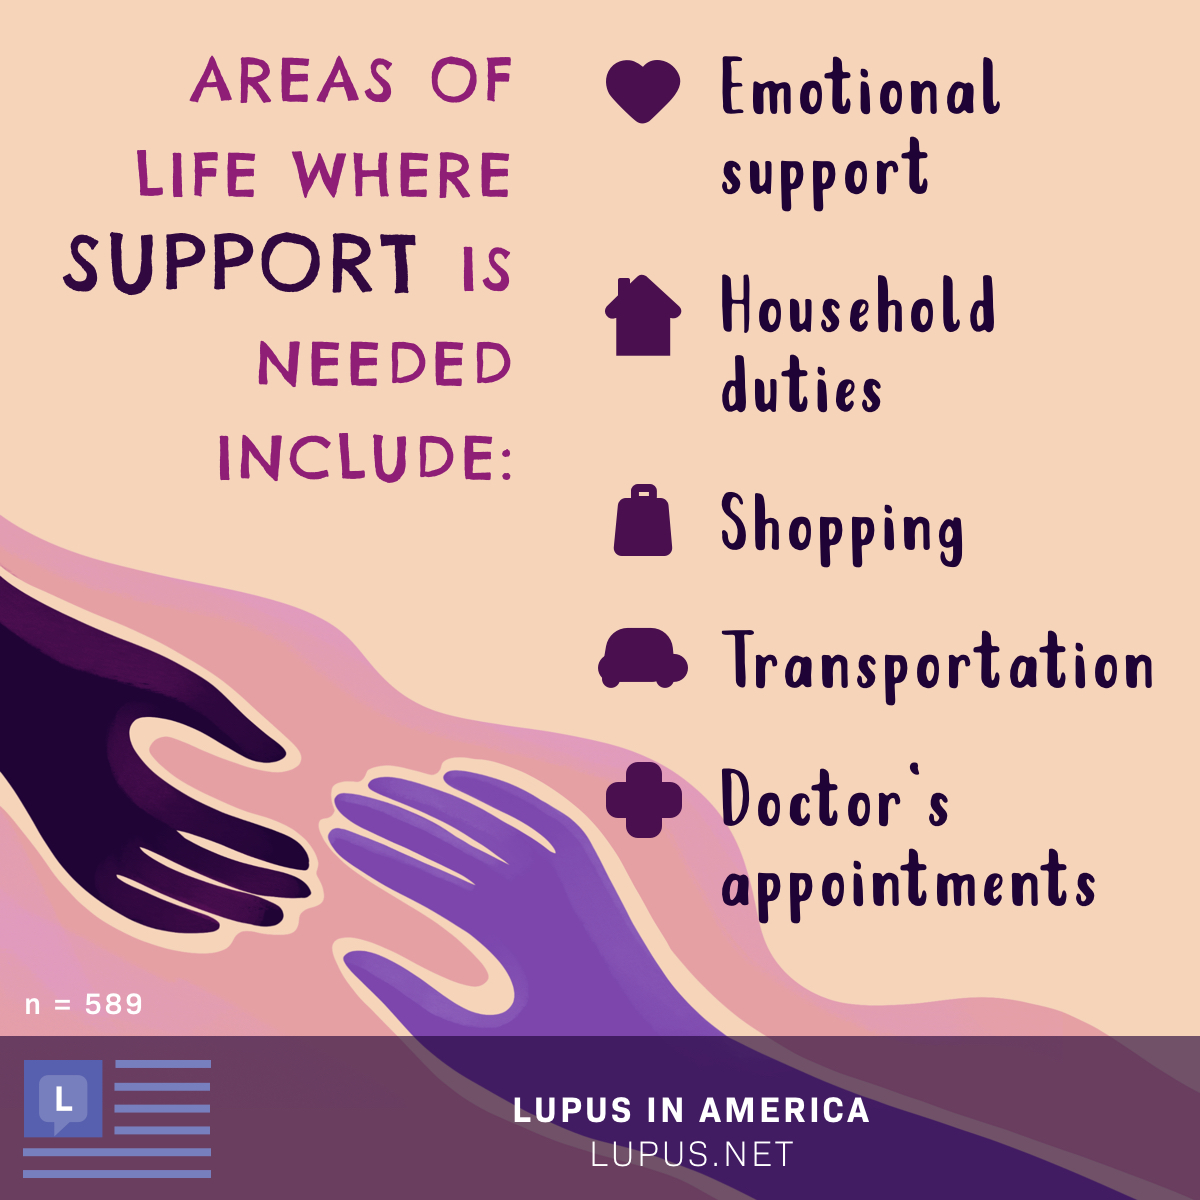 The areas of life where support is needed, including help with shopping, transportation, attending doctor’s appointments, medical care, and personal care. Imagery includes two purple hands reaching for each other.